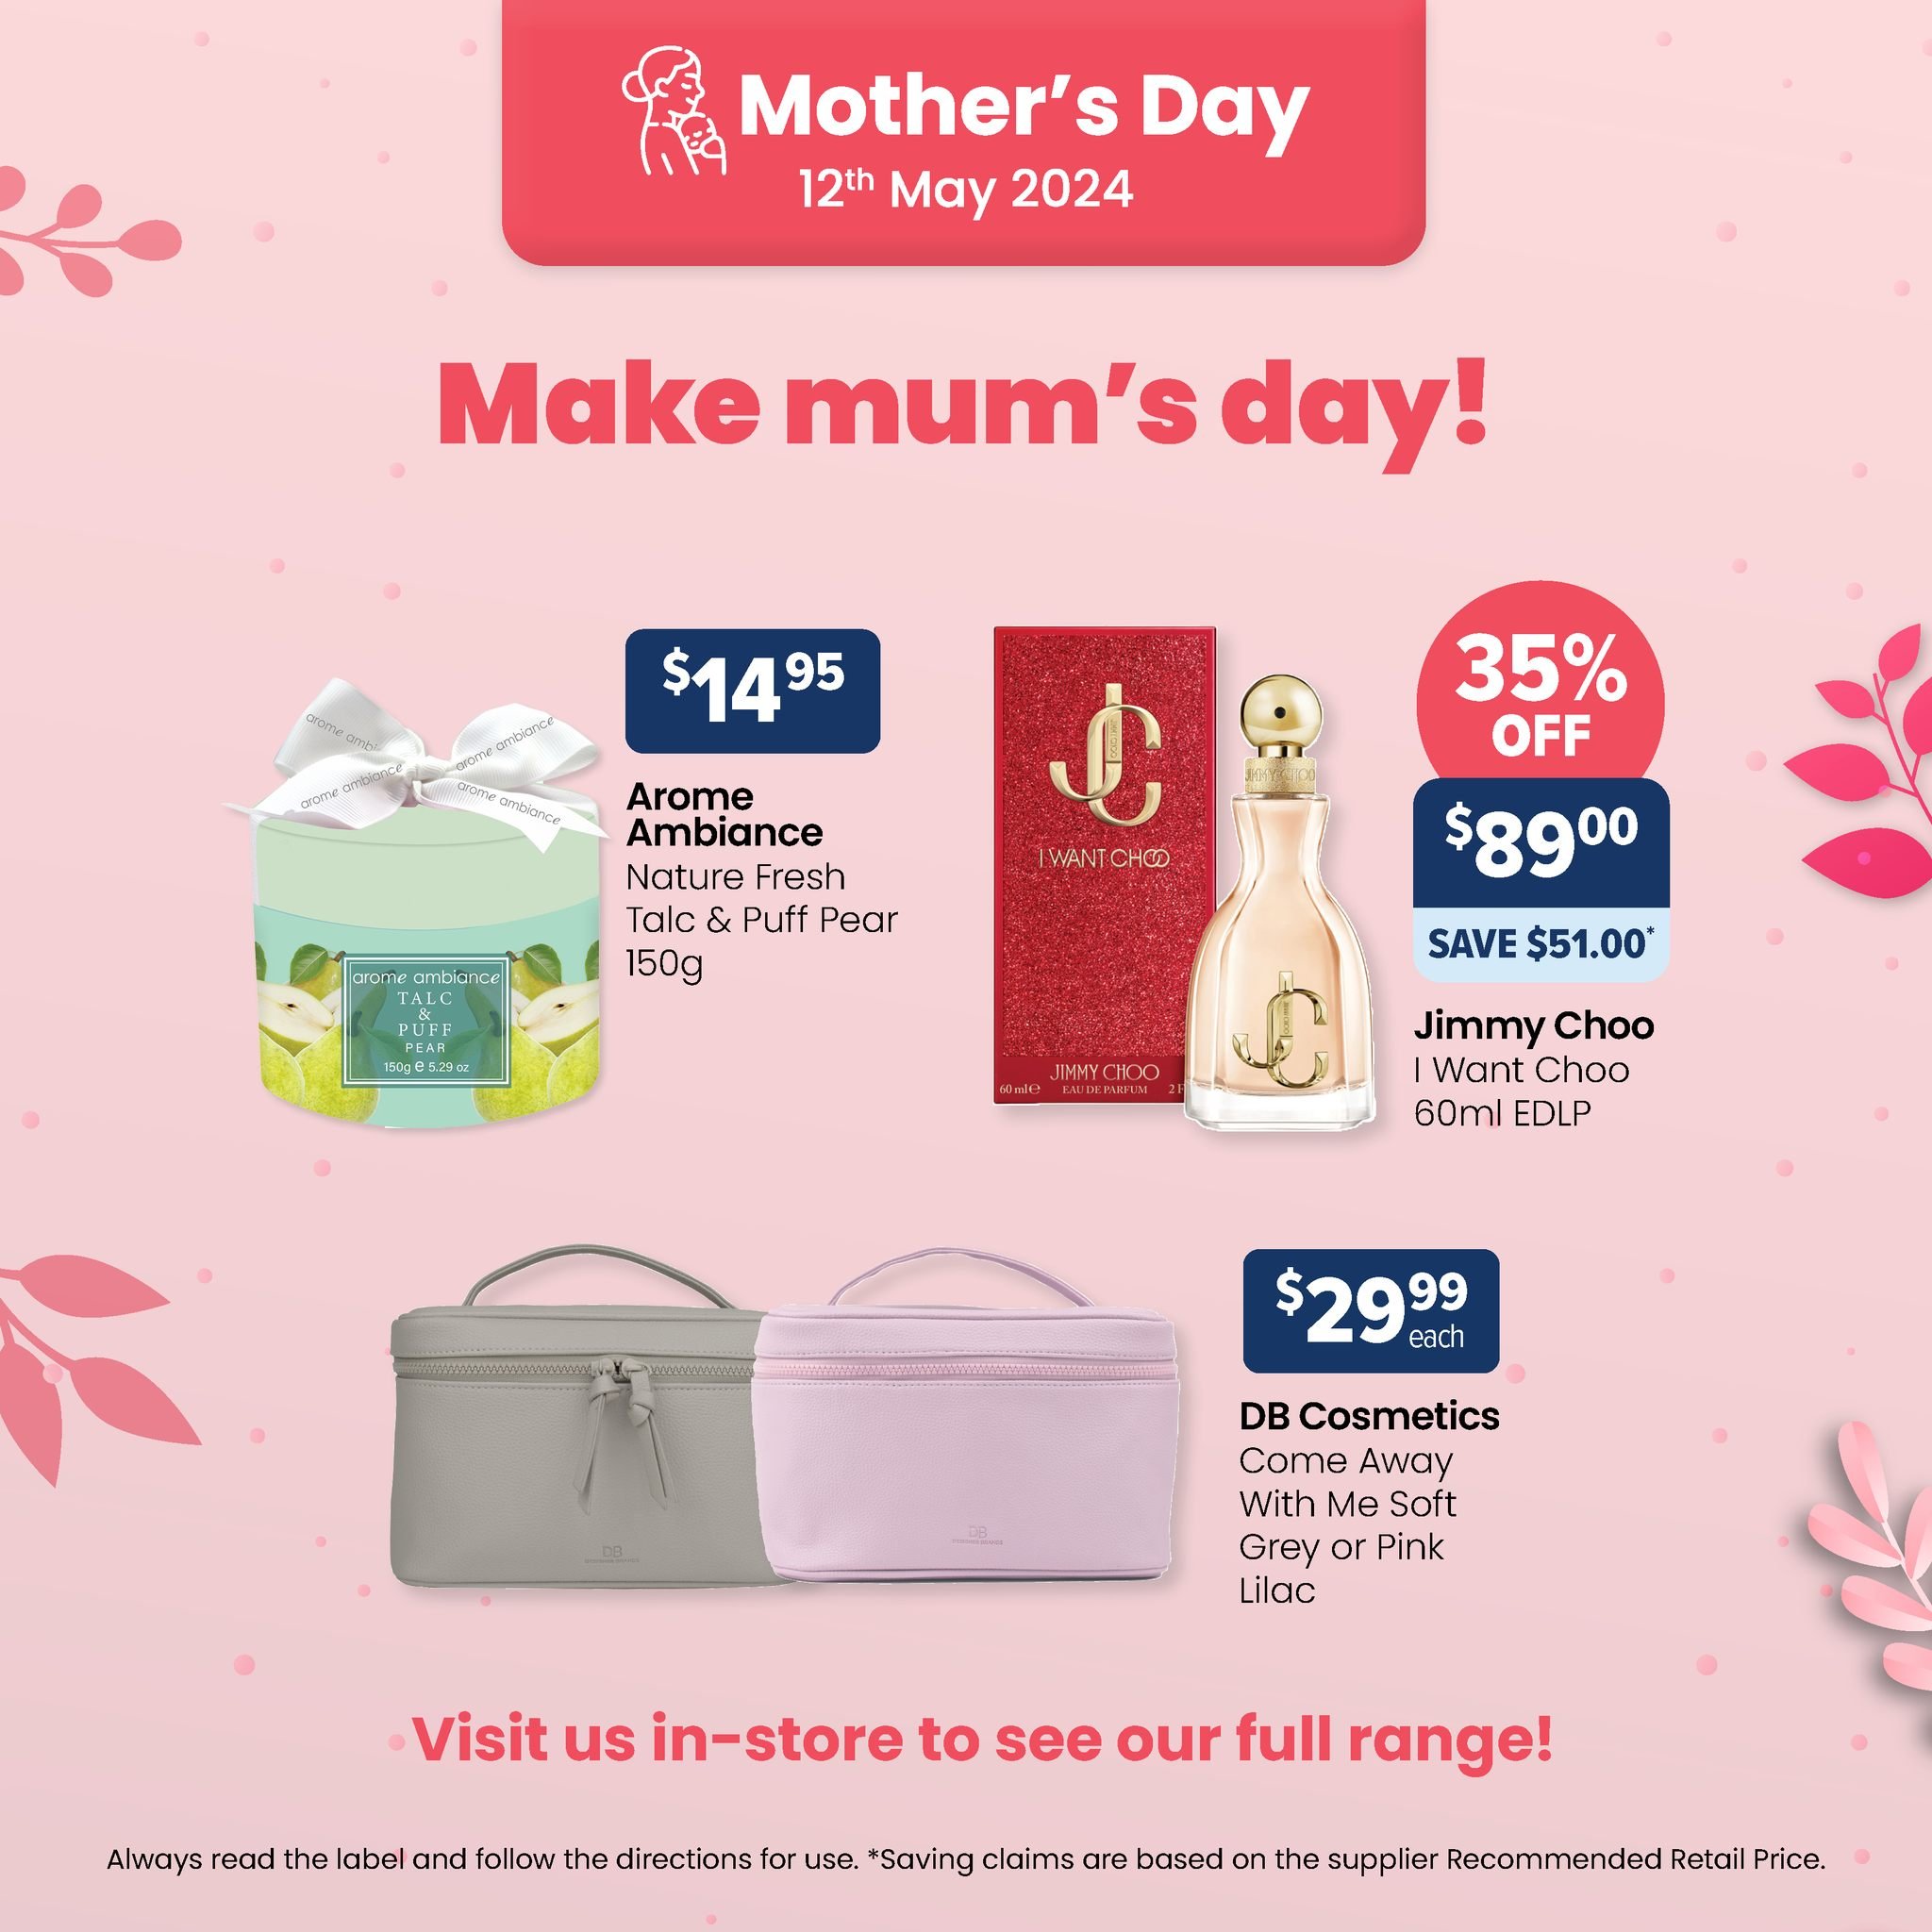 Still need to get a Mother's Day gift? 
We've got you covered!
With gifts starting from just $4.99, we've got everything you need to make Mum's day.
Visit us in-store today
#MothersDay #PharmacyAdvice #nelsonspharmacy #advantagepharmacy #health #comm